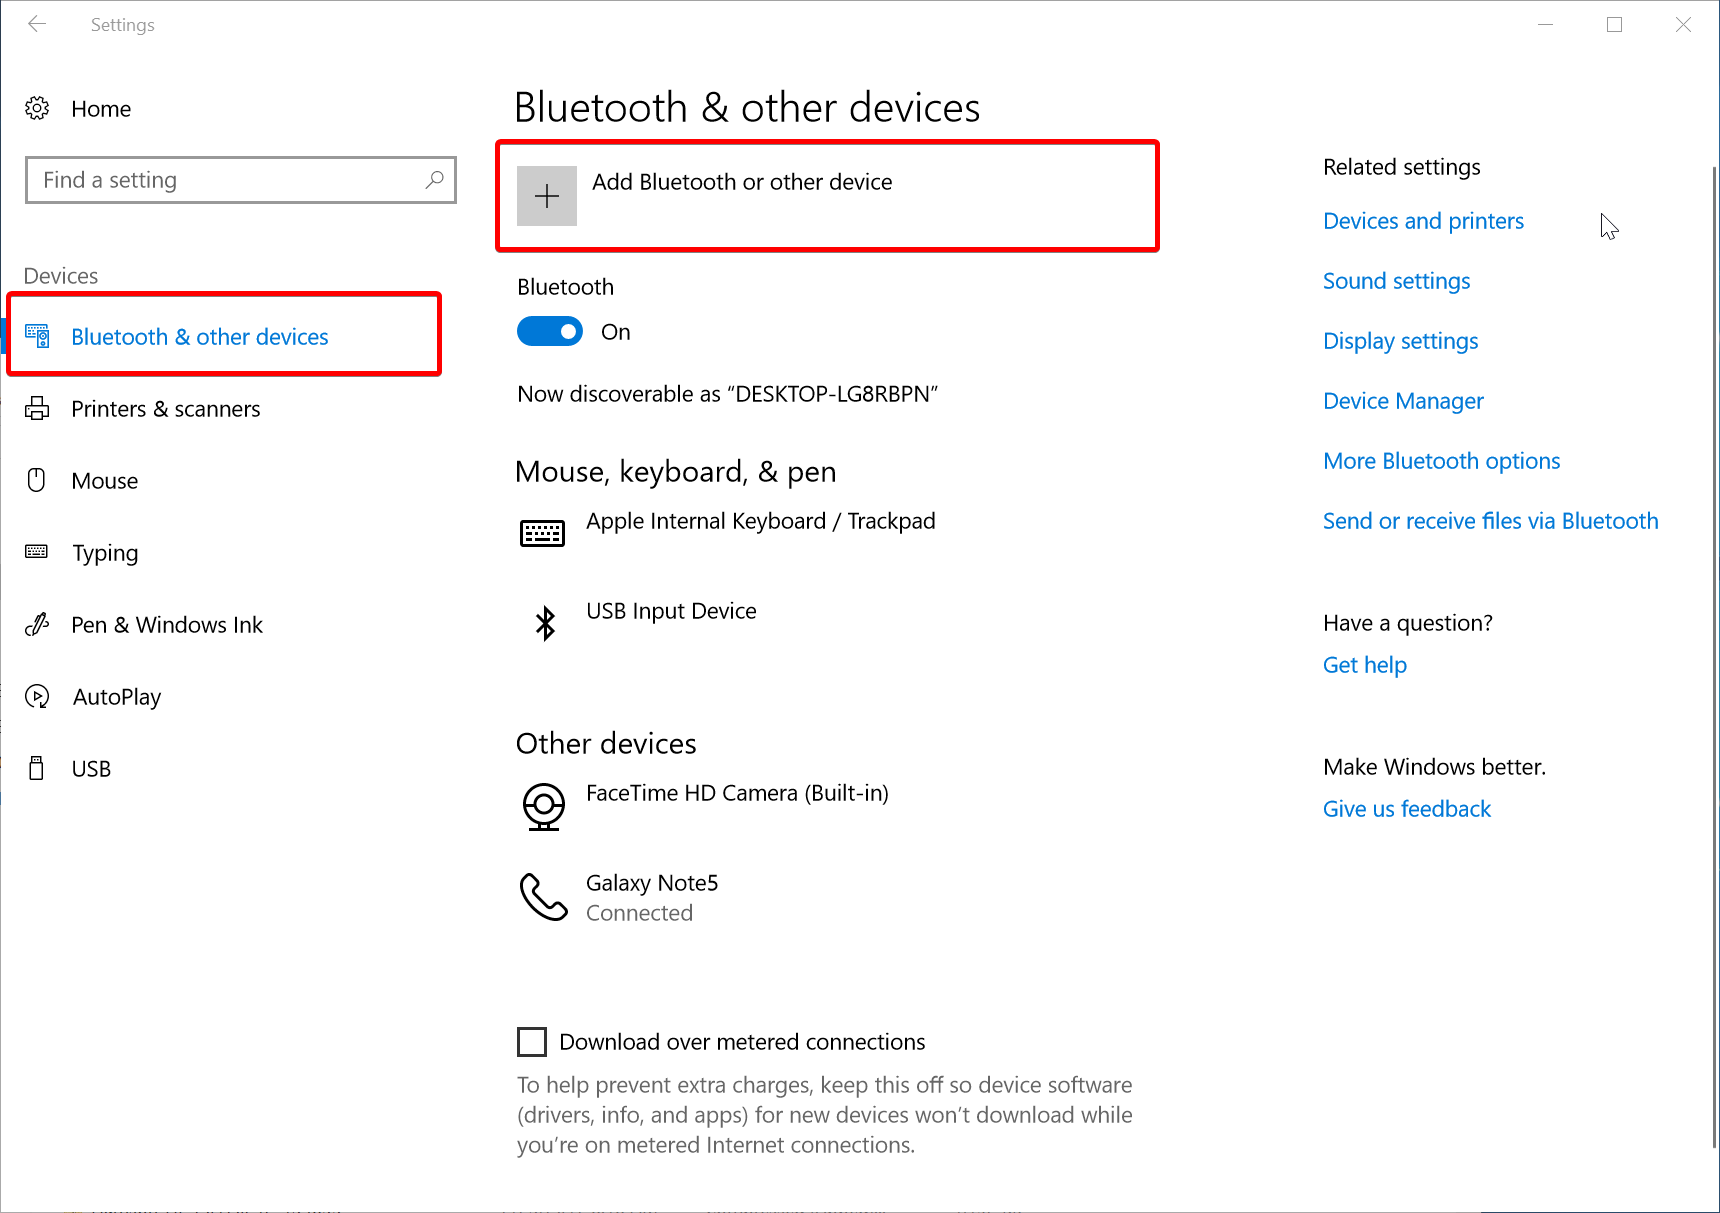 Changes to Bluetooth settings